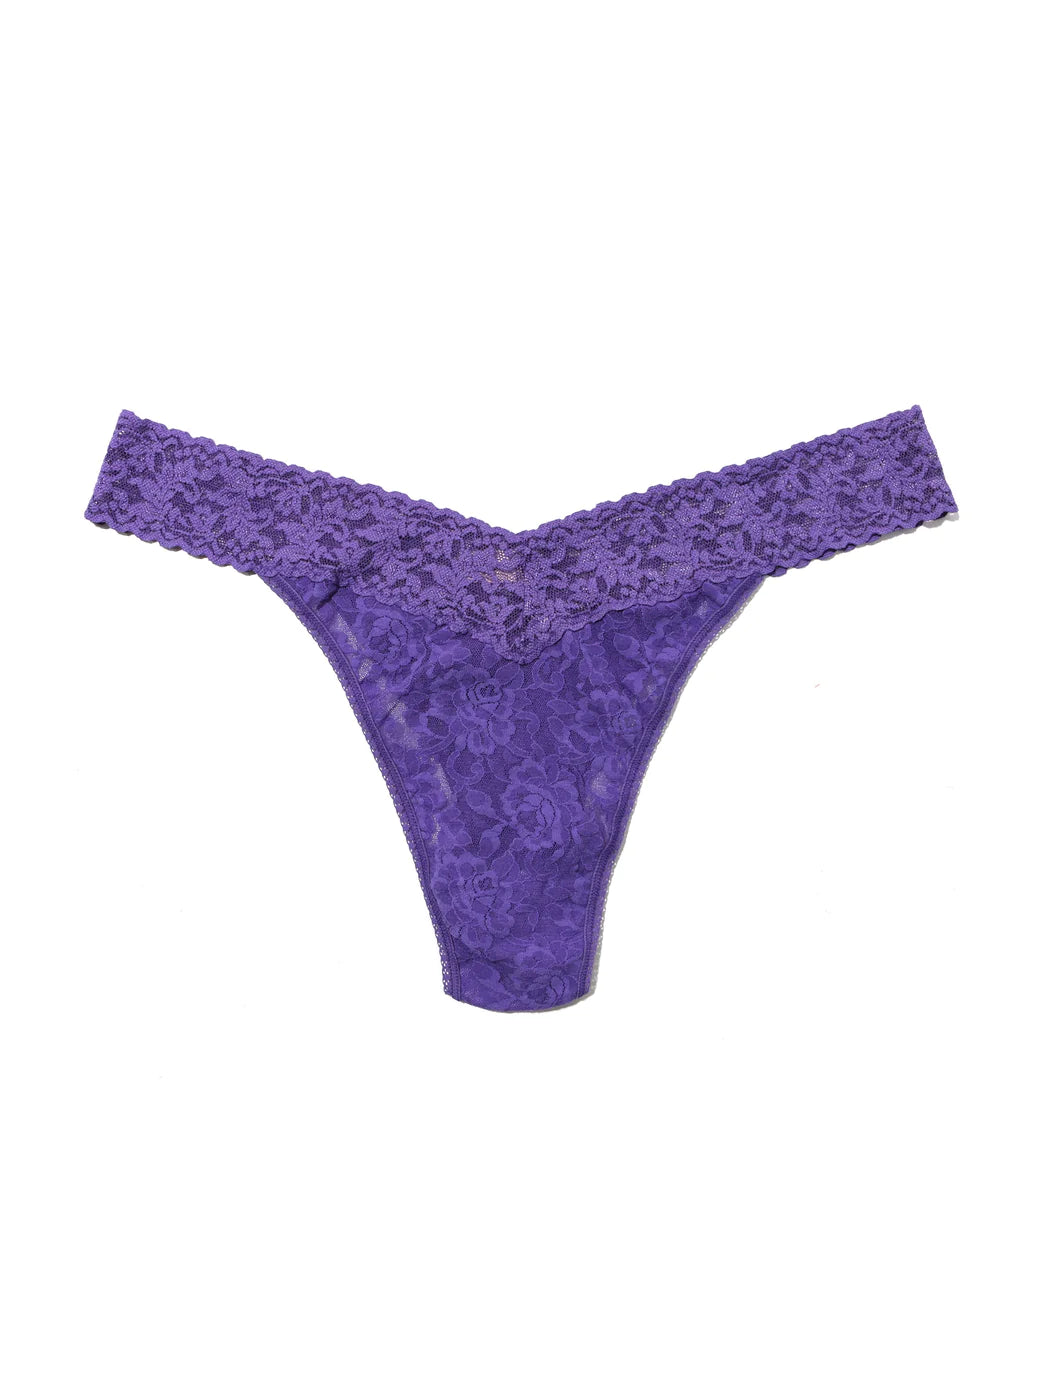 Buy wild-violet Hanky Panky Signature Lace Original Rise Thong-Packaged 4811p